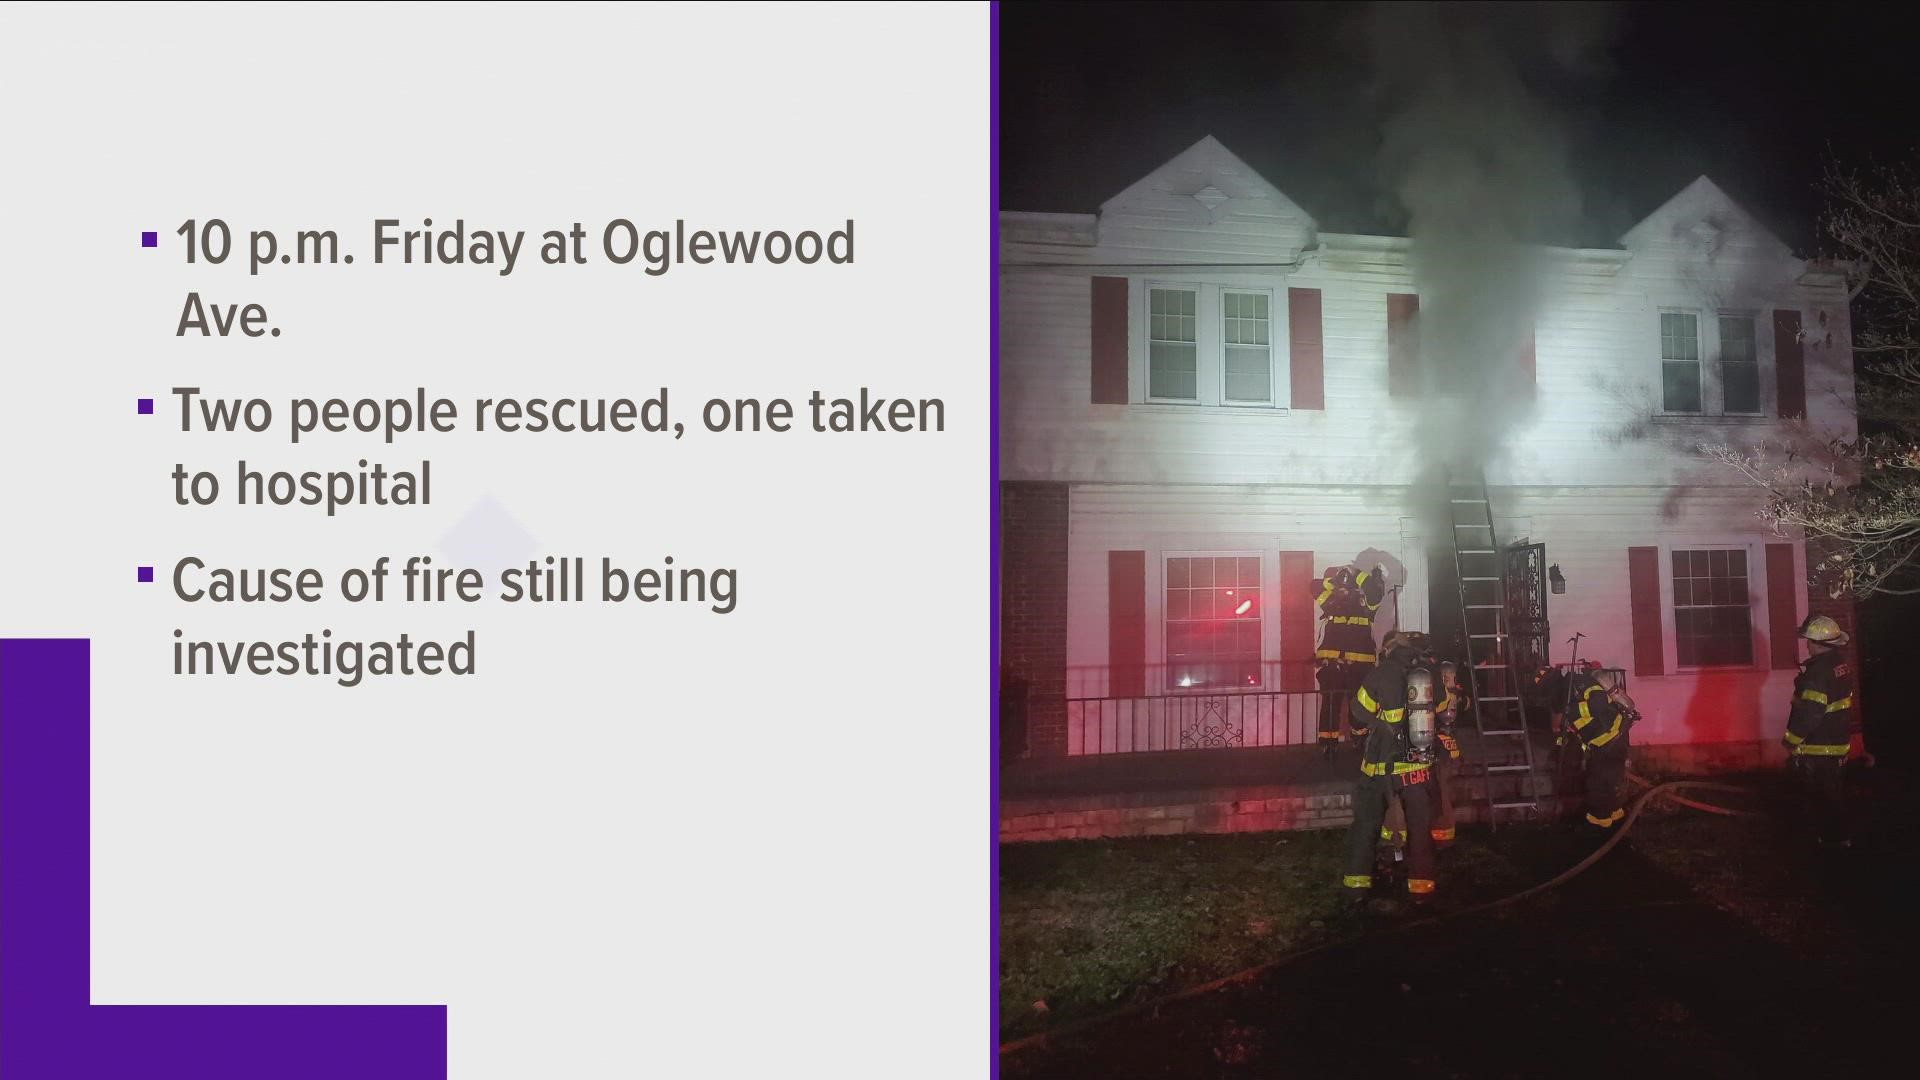 Knoxville Fire Department responded to a house fire around 10 p.m. on November 26.